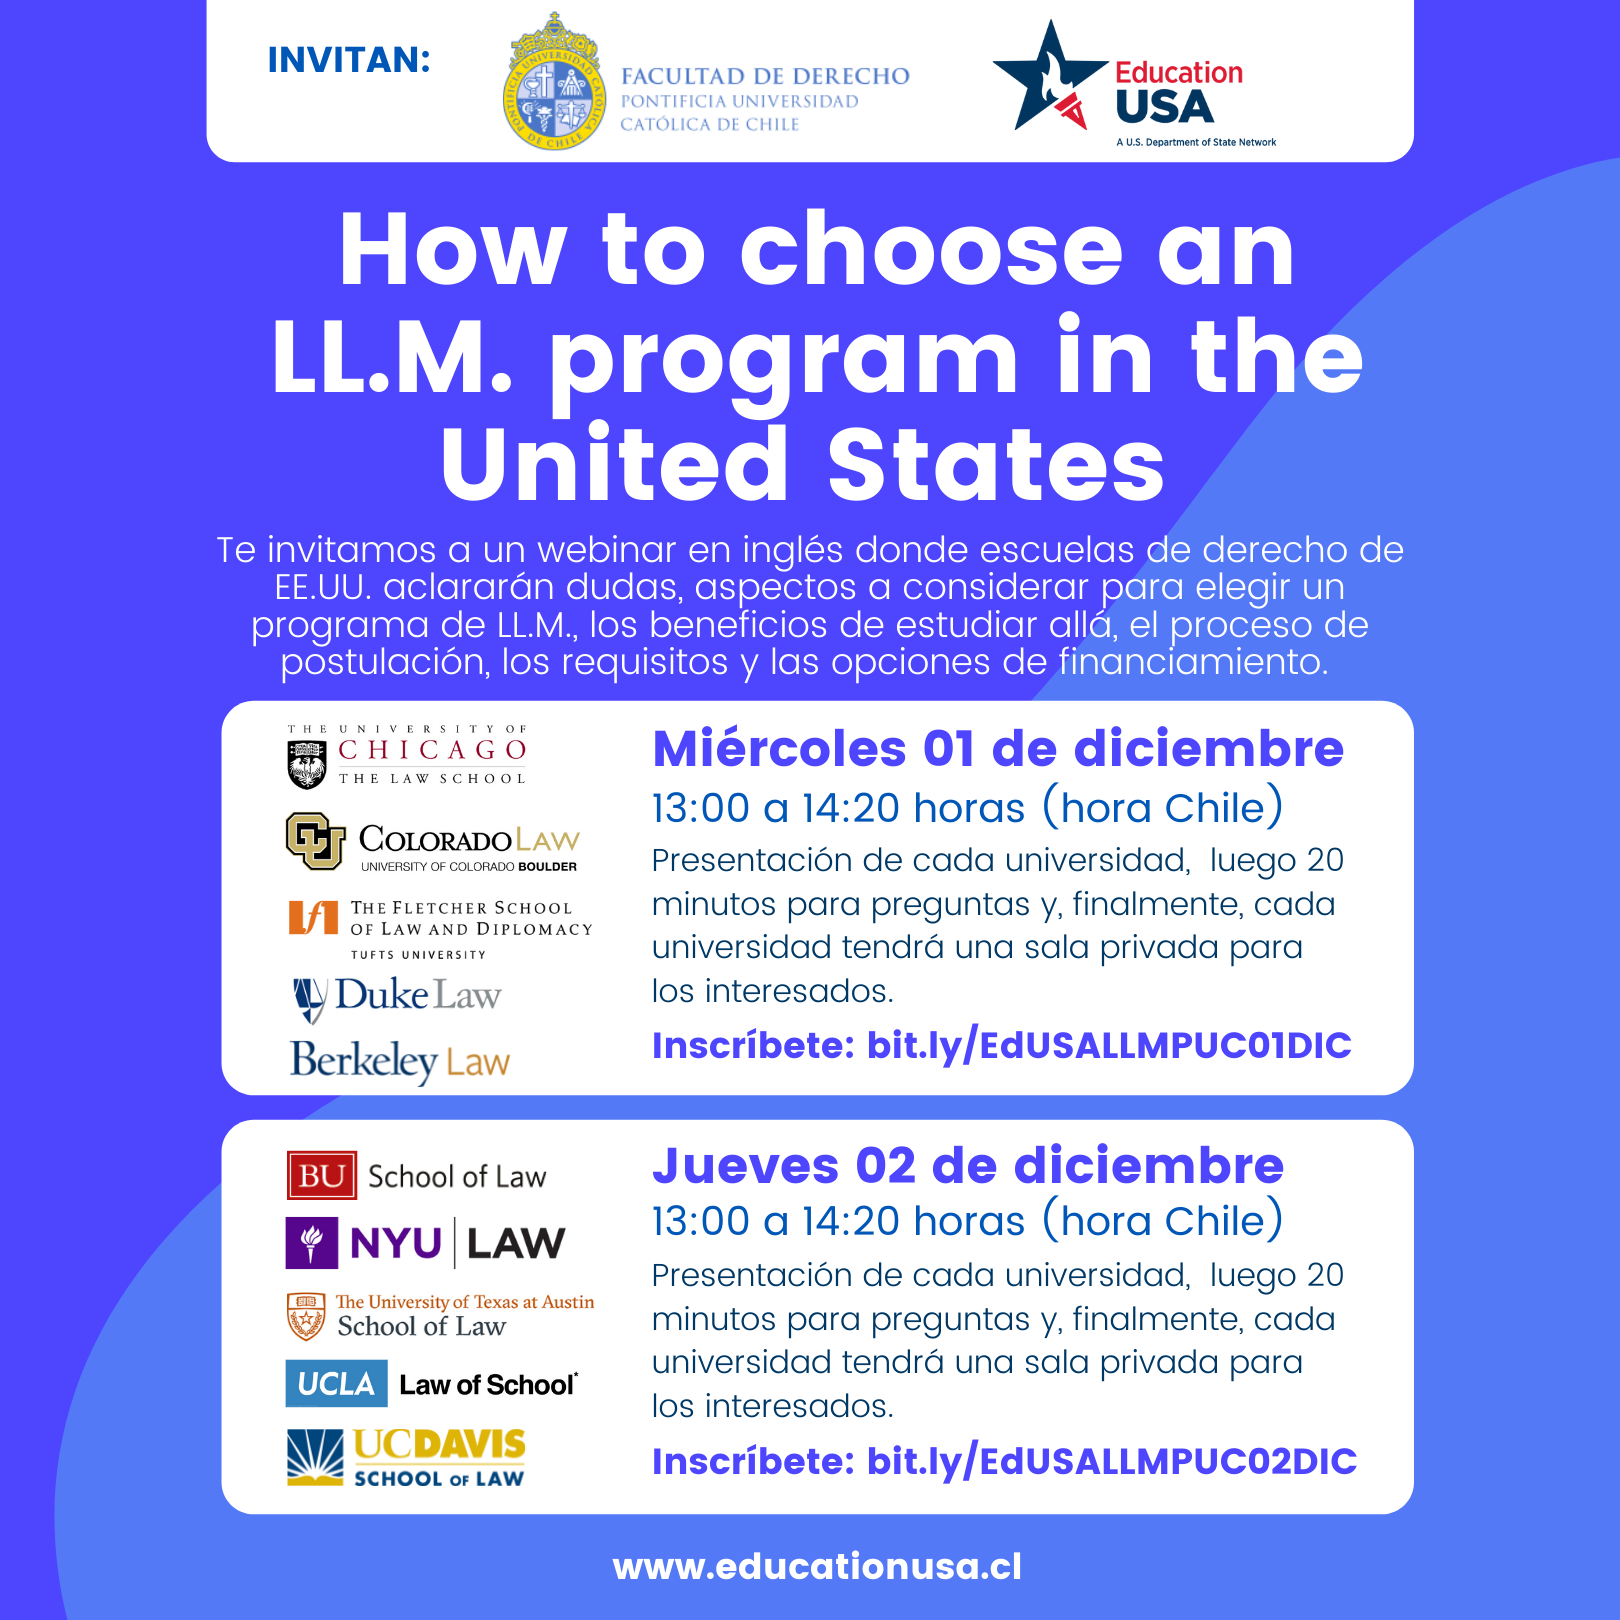 How to choose an LL.M. program in the United States 1